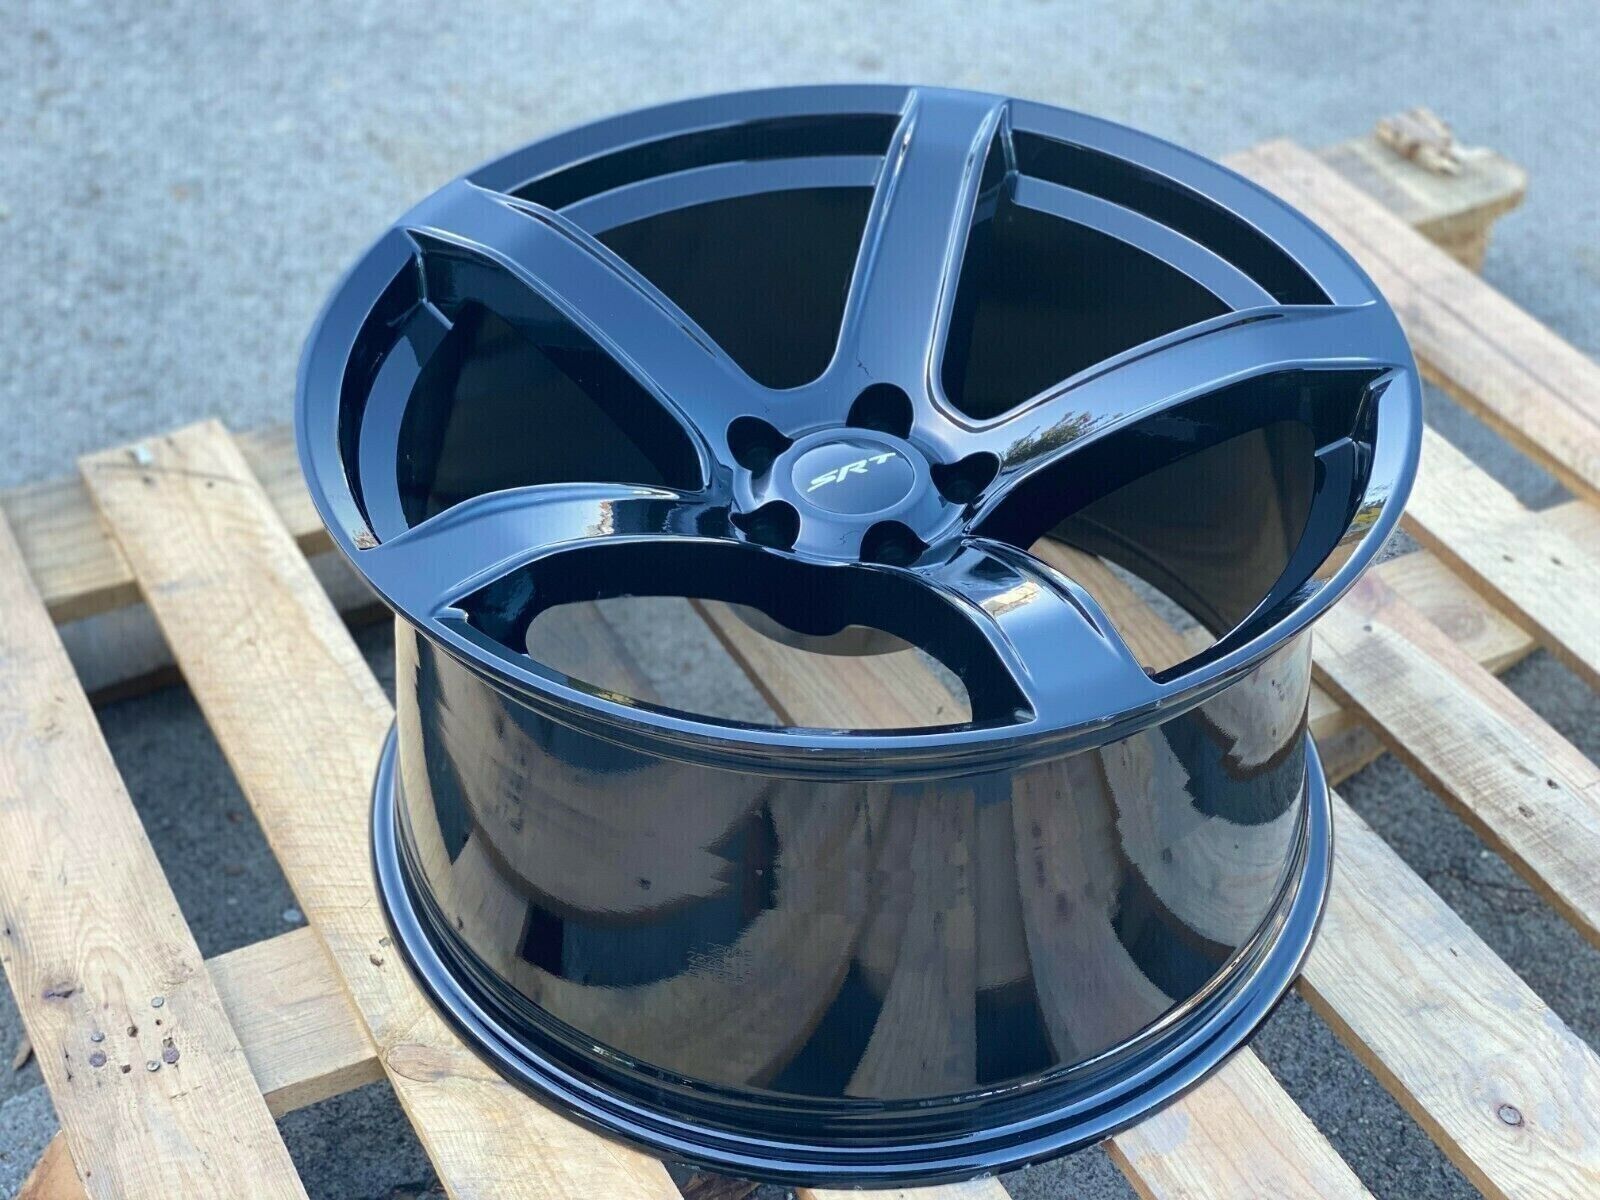 20x11 +0 WHEELS FIT WIDE BODY DODGE CHALLENGER CHARGER HELLCAT SRT STYLE GLOSS